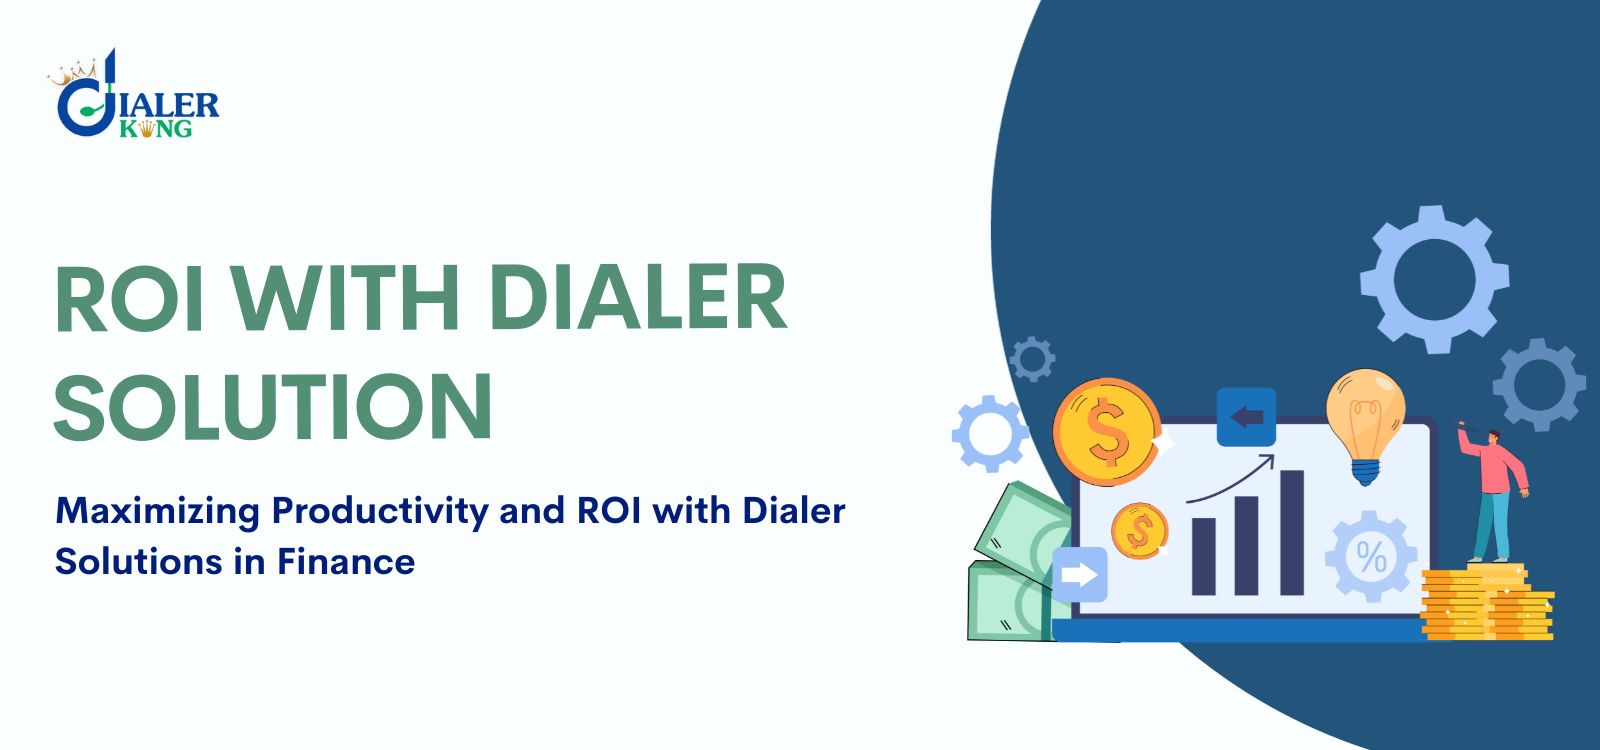 Roi with dialer solution